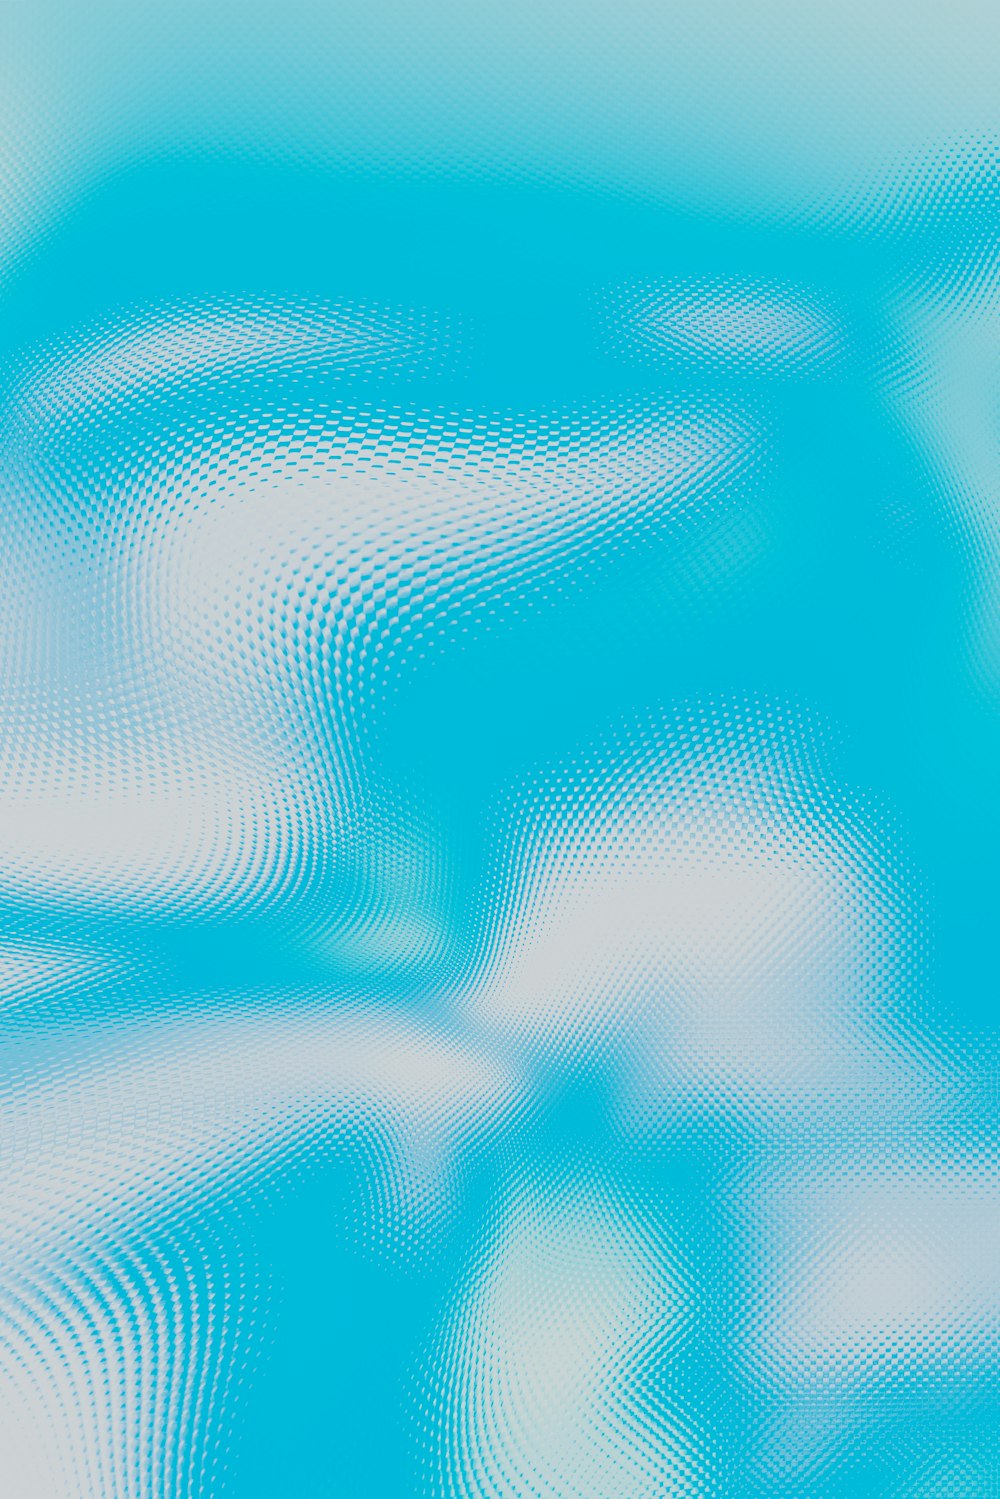 a blurry image of a blue sky with white clouds